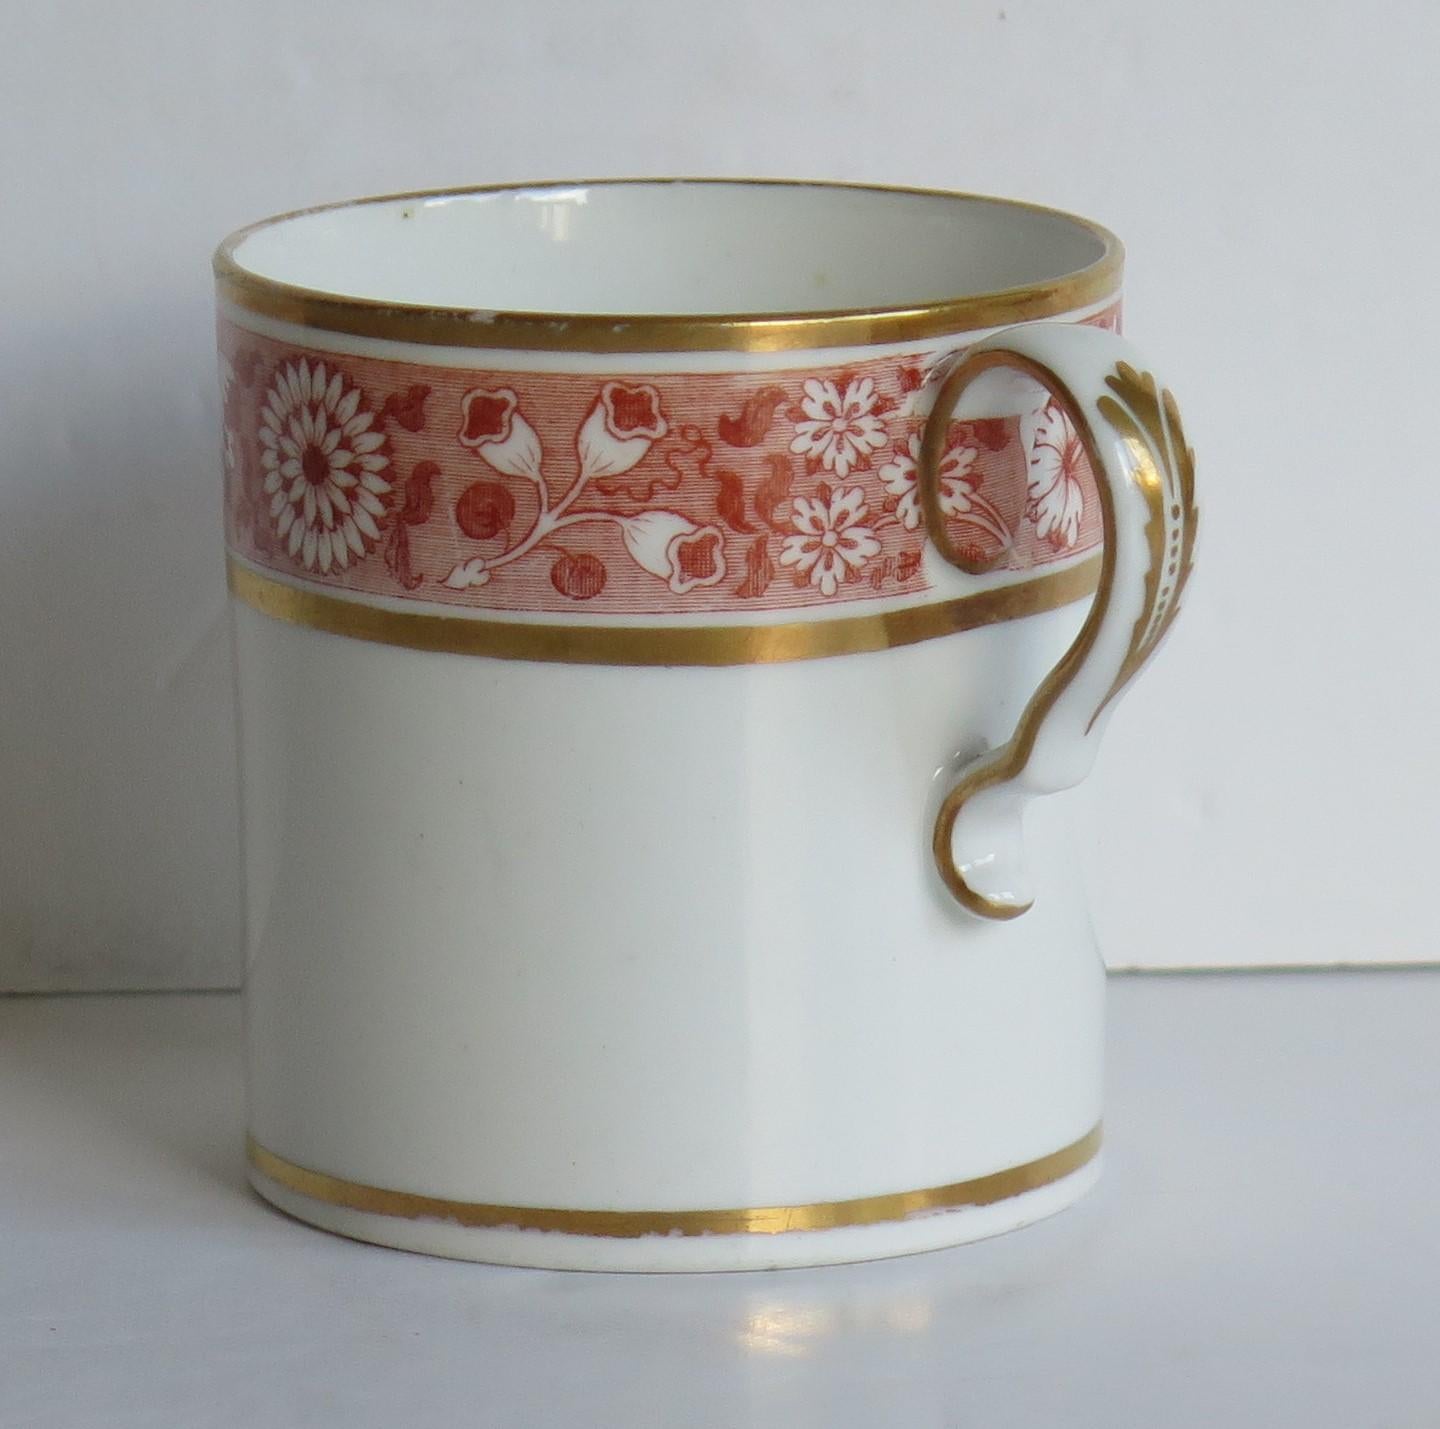 This is a good quality porcelain coffee can that we attribute to Spode of Staffordshire, England, made during the very early 19th century, George 111rd period, circa 1810.

The coffee can is nominally parallel, with a loop handle having one lower